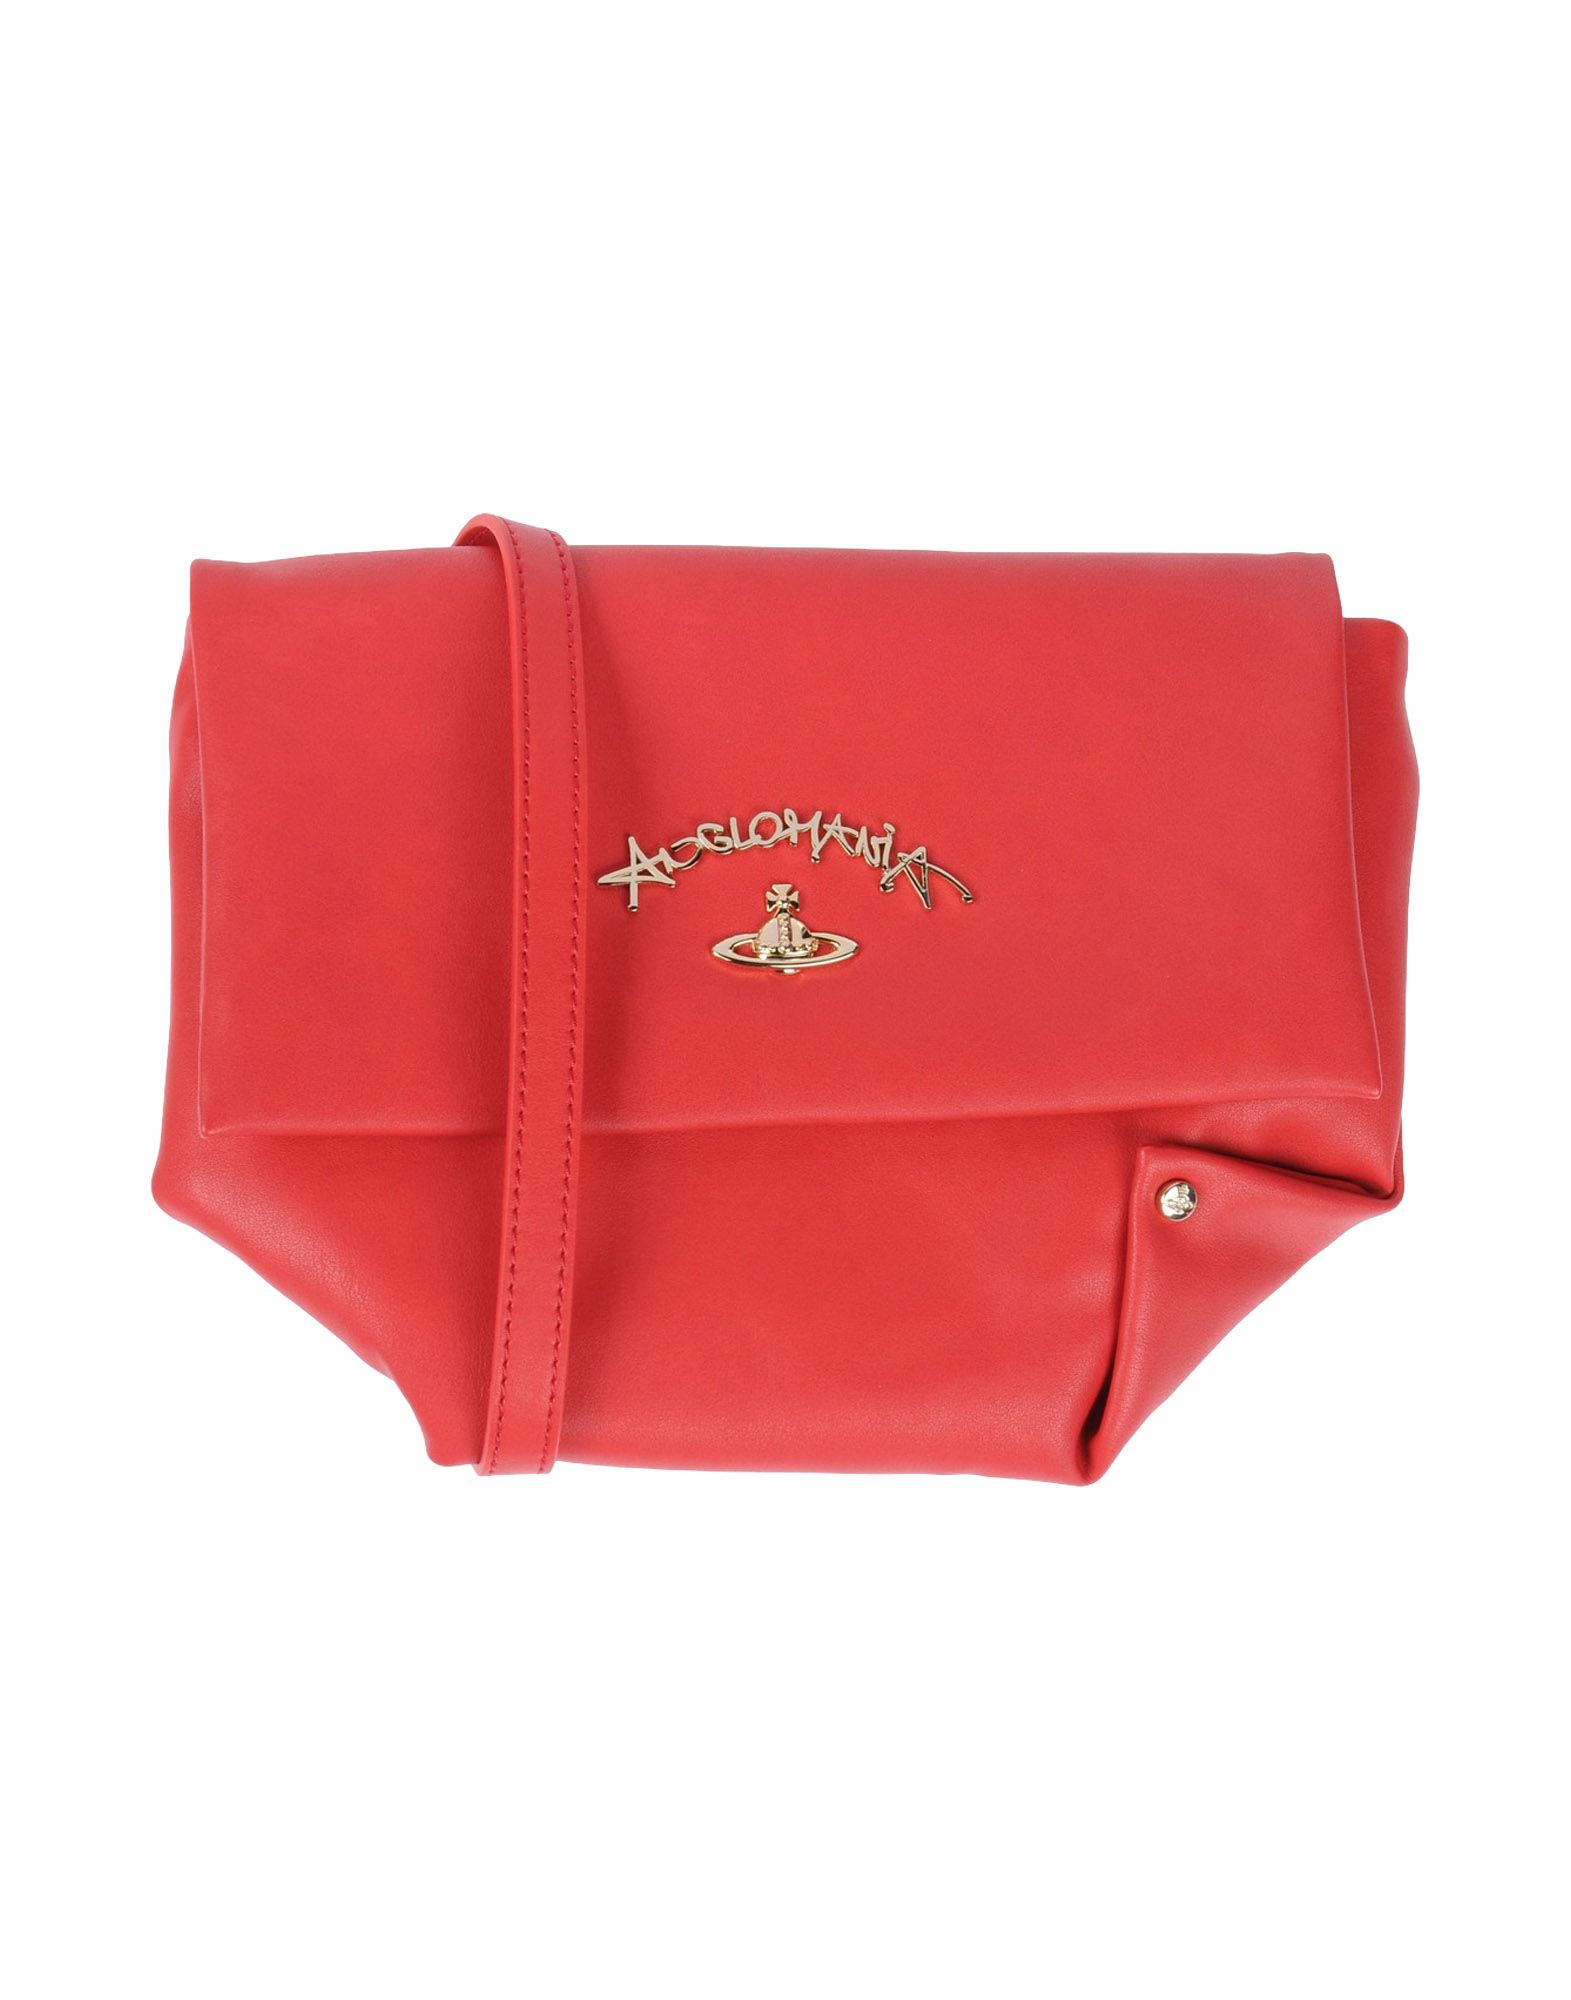 VIVIENNE WESTWOOD ANGLOMANIA Cross-body bags,45417082JC 1